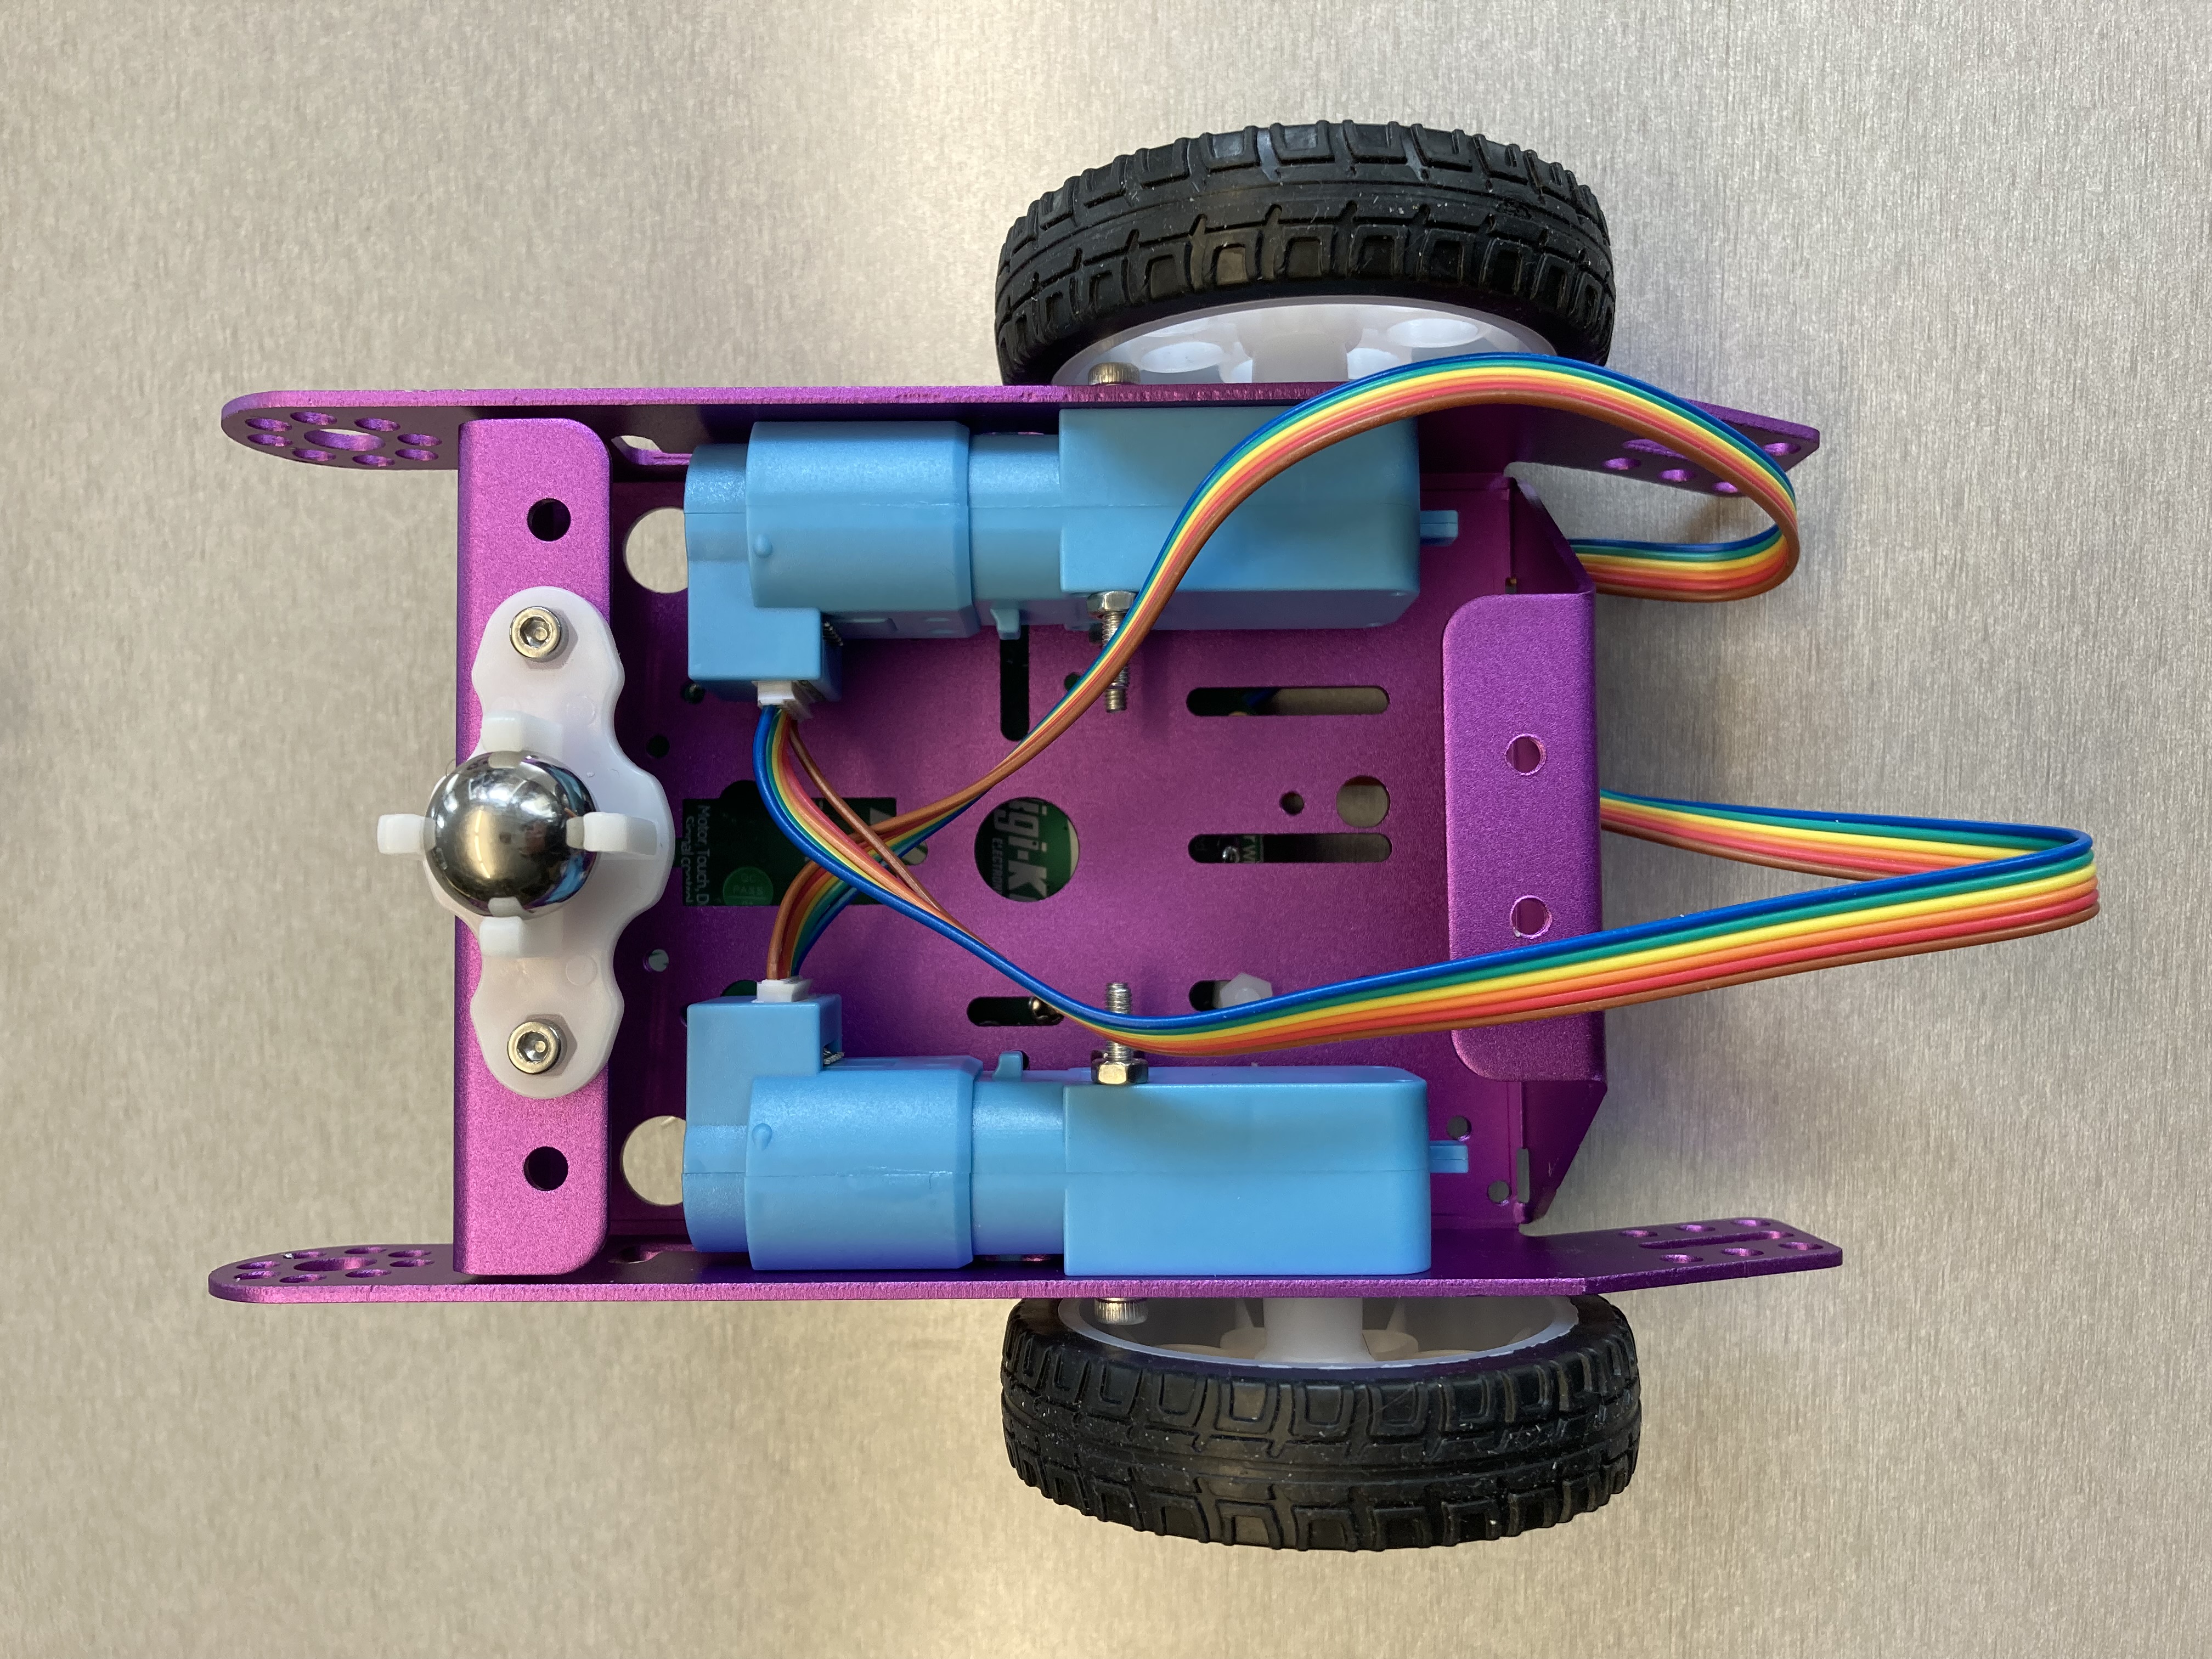 A prototype of an open robot with a purple chassis and two blue motors.